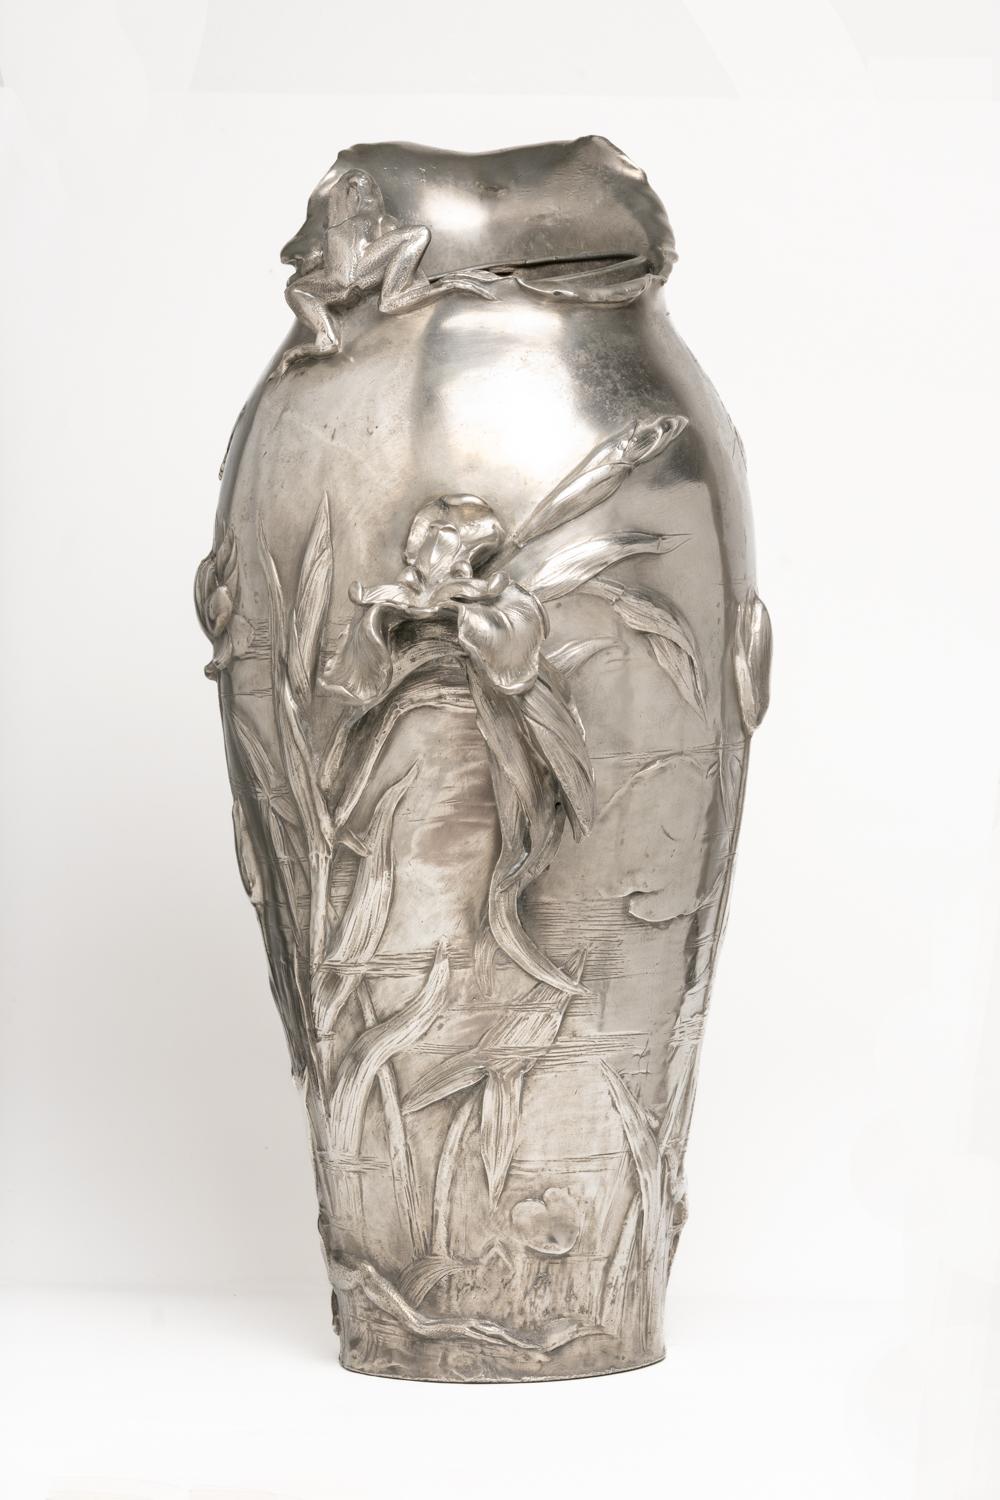 Antique Art Nouveau French Pewter Floral Vase By Frédéric Debon In Good Condition For Sale In Portland, GB